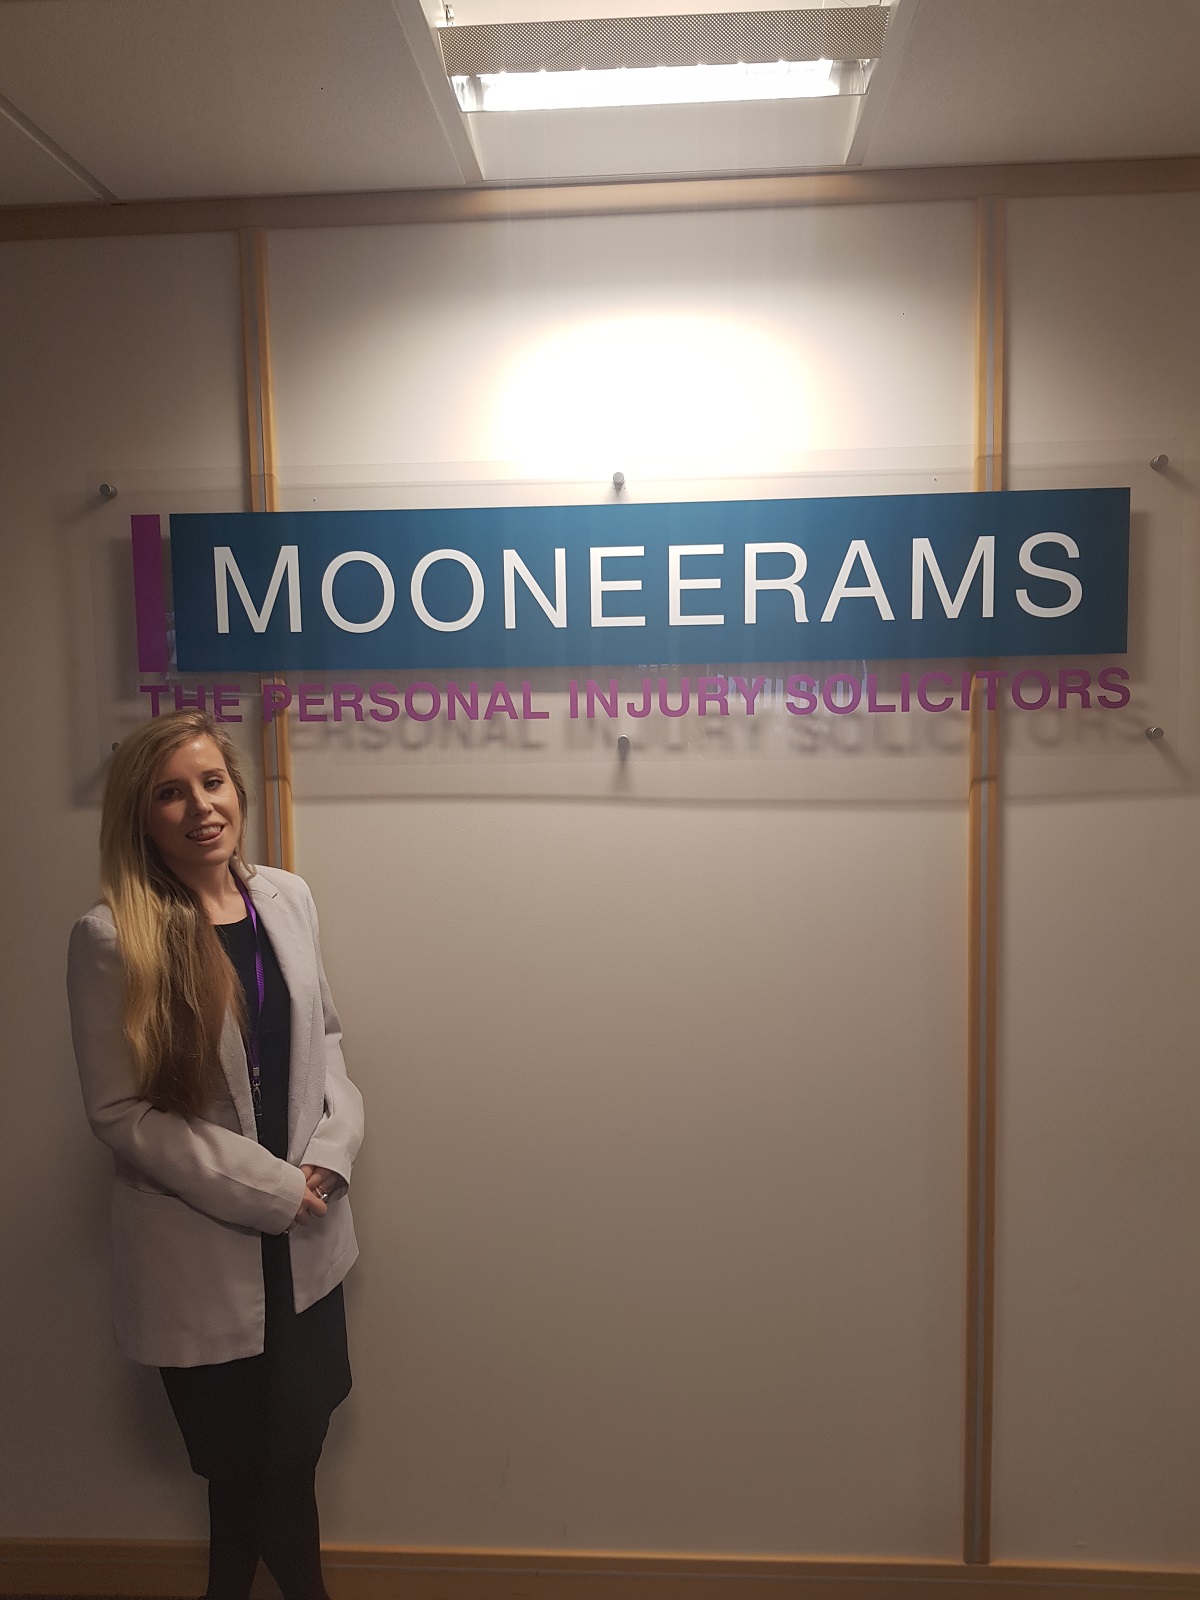 Female standing to the left of a sign with Mooneerams in white text on a blue background and ppersoanl injury solicitors written underneath the sign in pink lettering